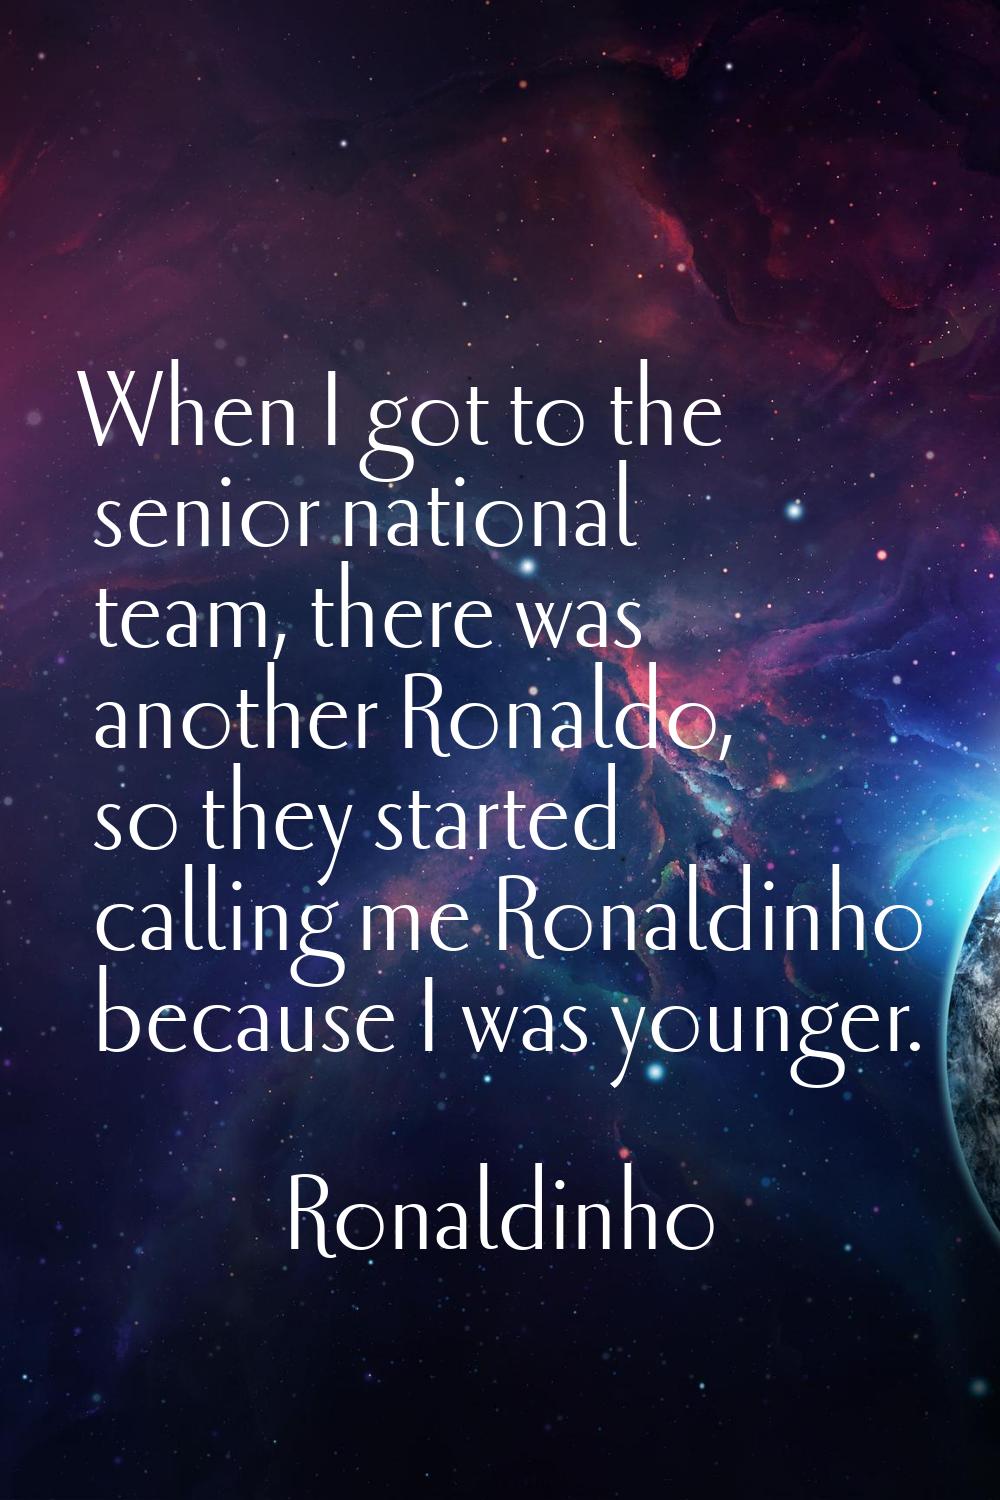 When I got to the senior national team, there was another Ronaldo, so they started calling me Ronal